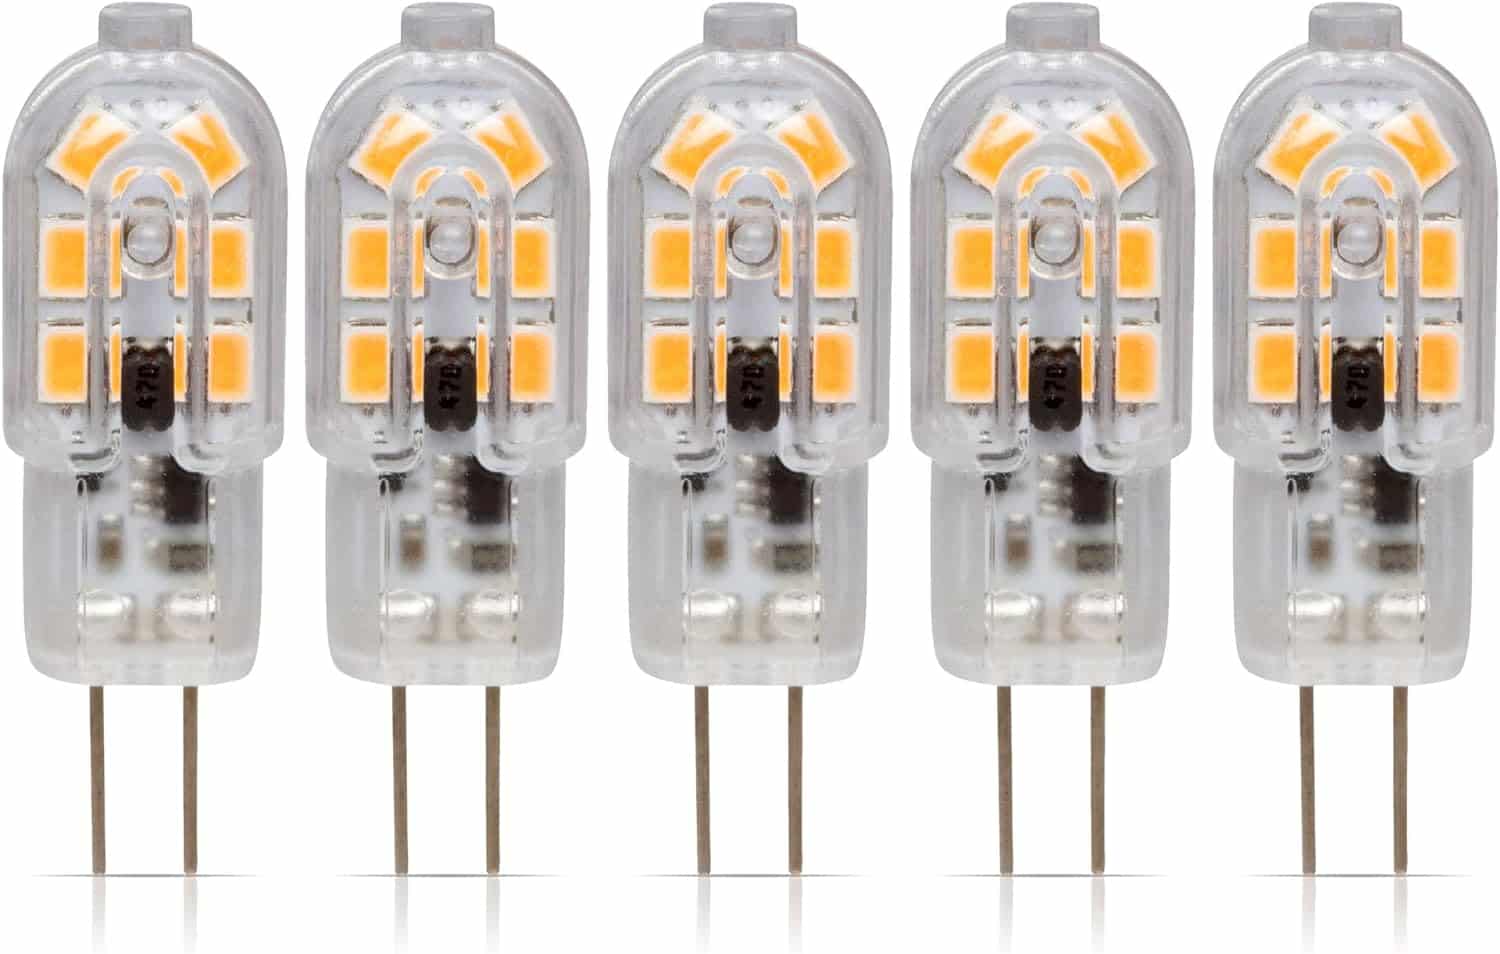 Simba Lighting LED G4 Bulb (5 Pack) 1.5W T3 20W Halogen Replacement 12V AC/DC JC Bi-Pin Base for Accent Lights, Under Cabinet Puck Light, Chandeliers, Track Lighting, Non-Dimmable, Soft White 3000K